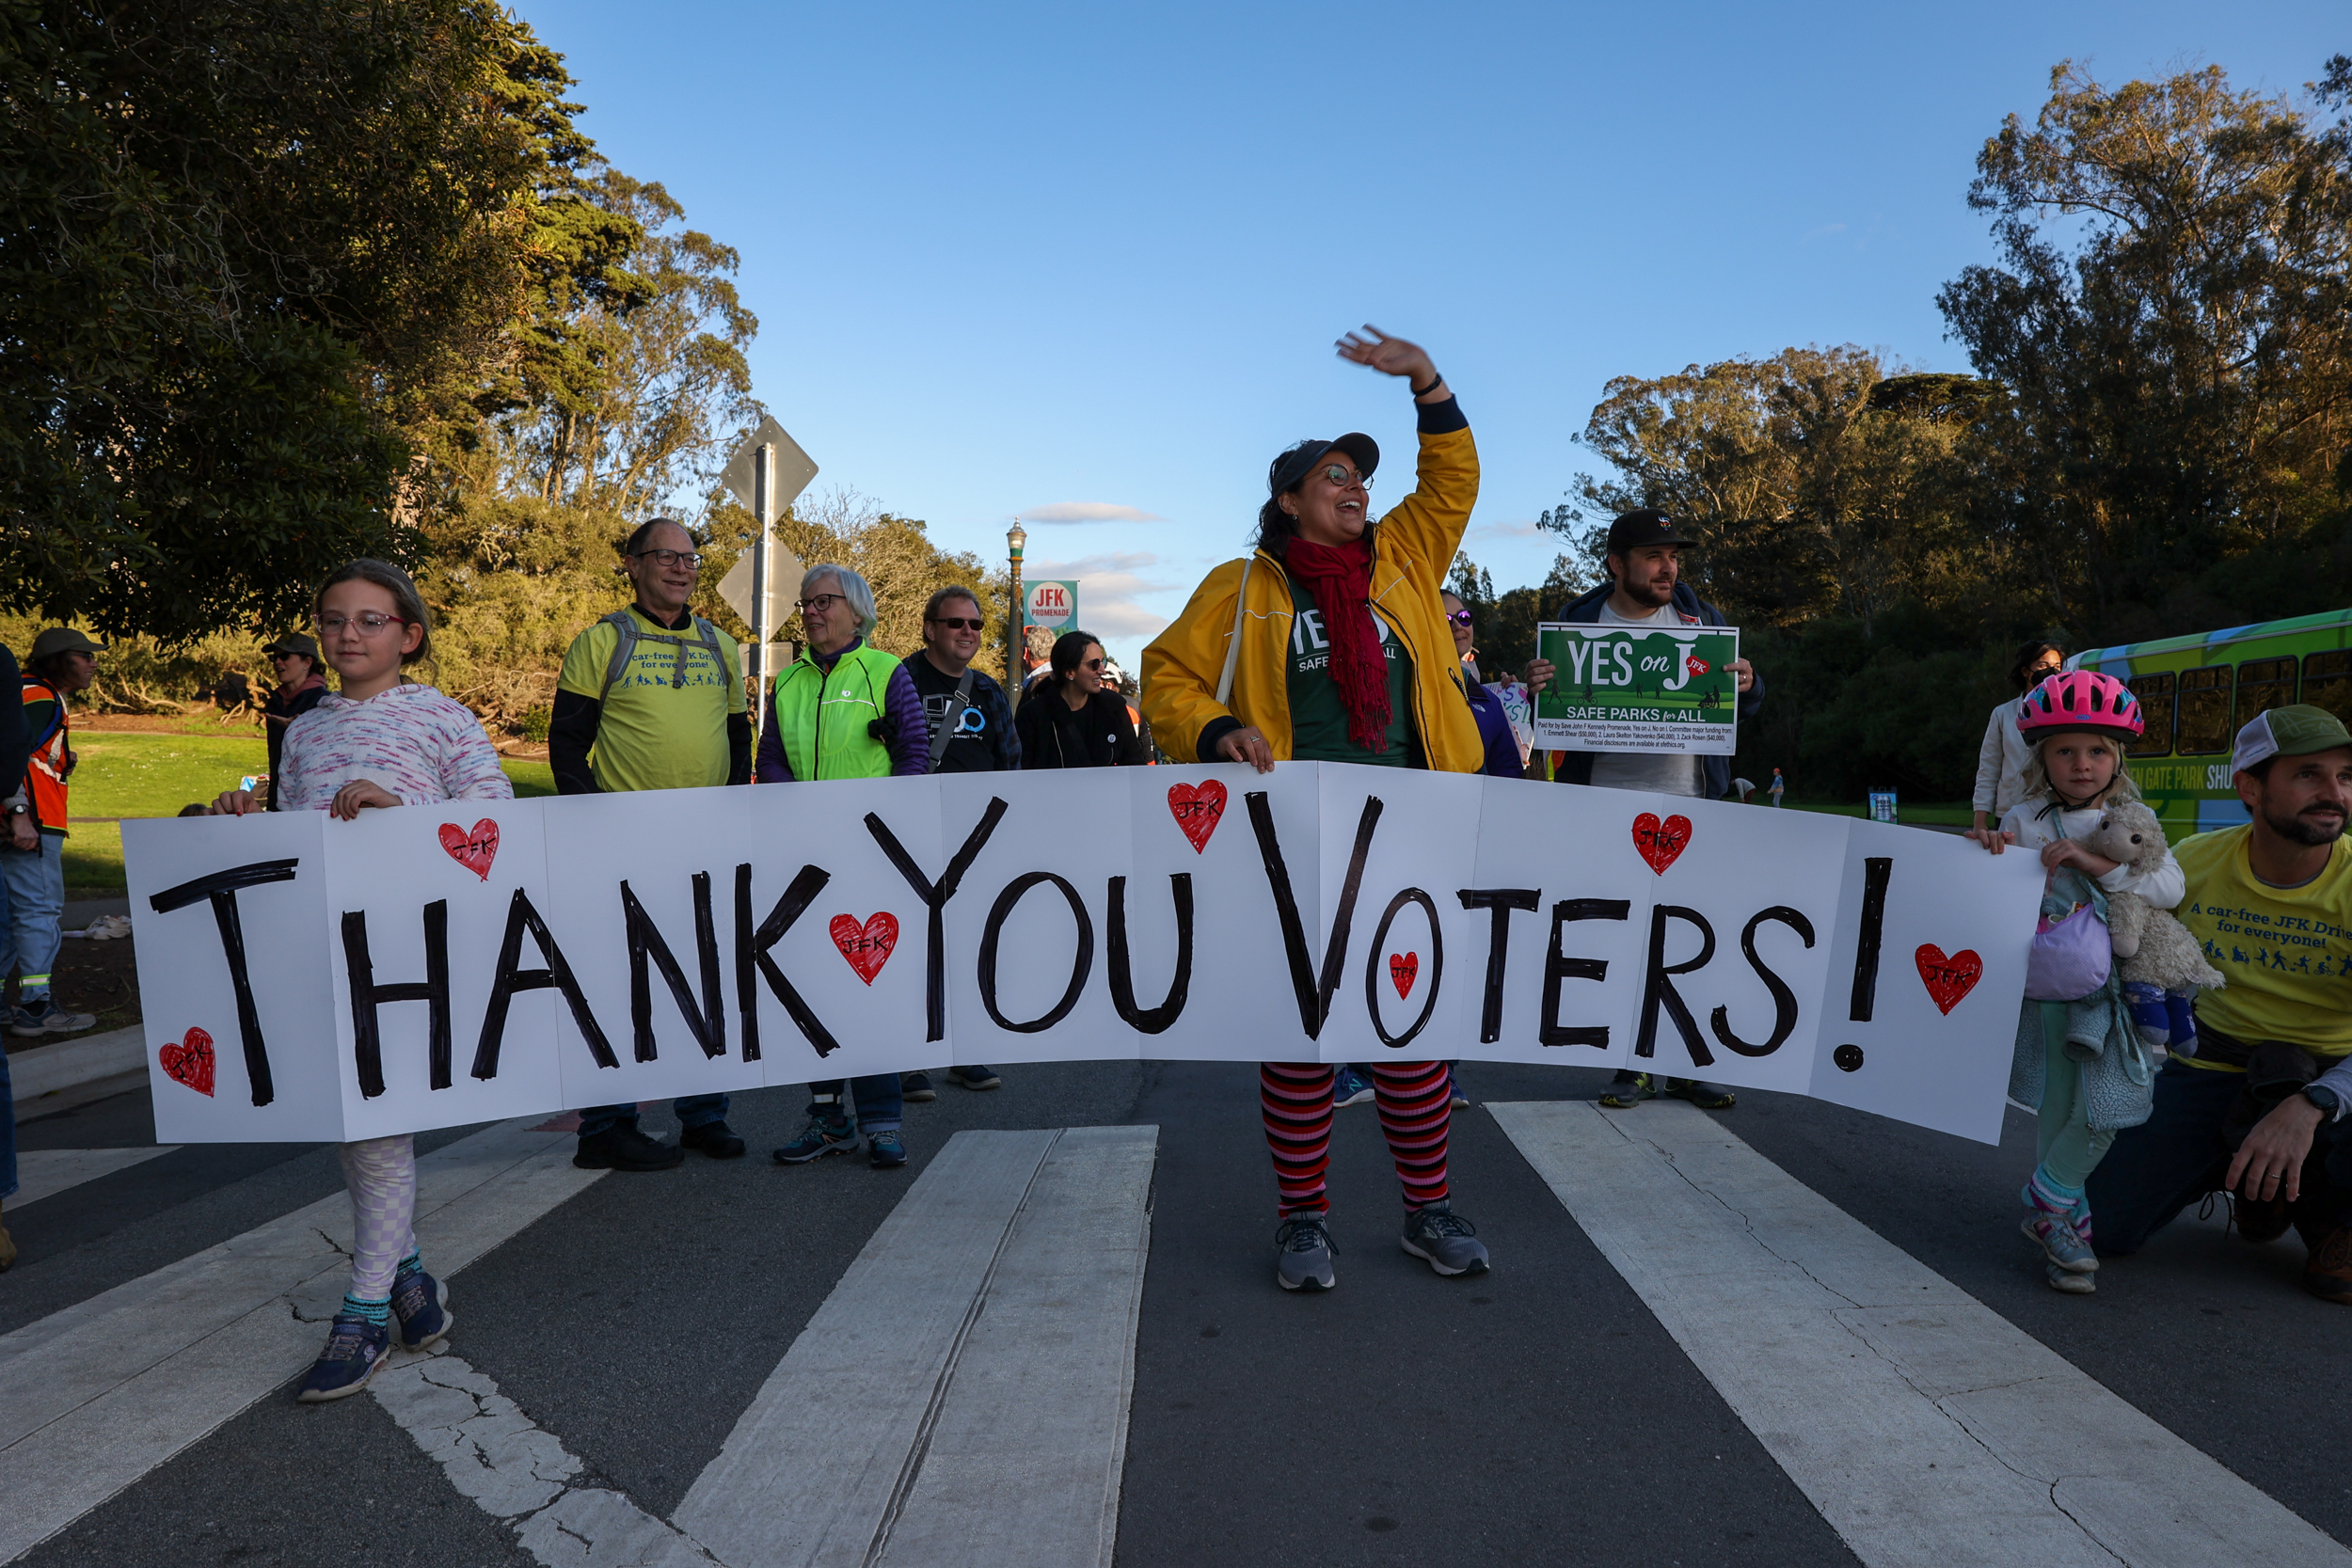 A group of people stand on a street holding a large sign that reads &quot;THANK YOU VOTERS!&quot; with hearts. The scene is outdoors with trees and a clear sky.